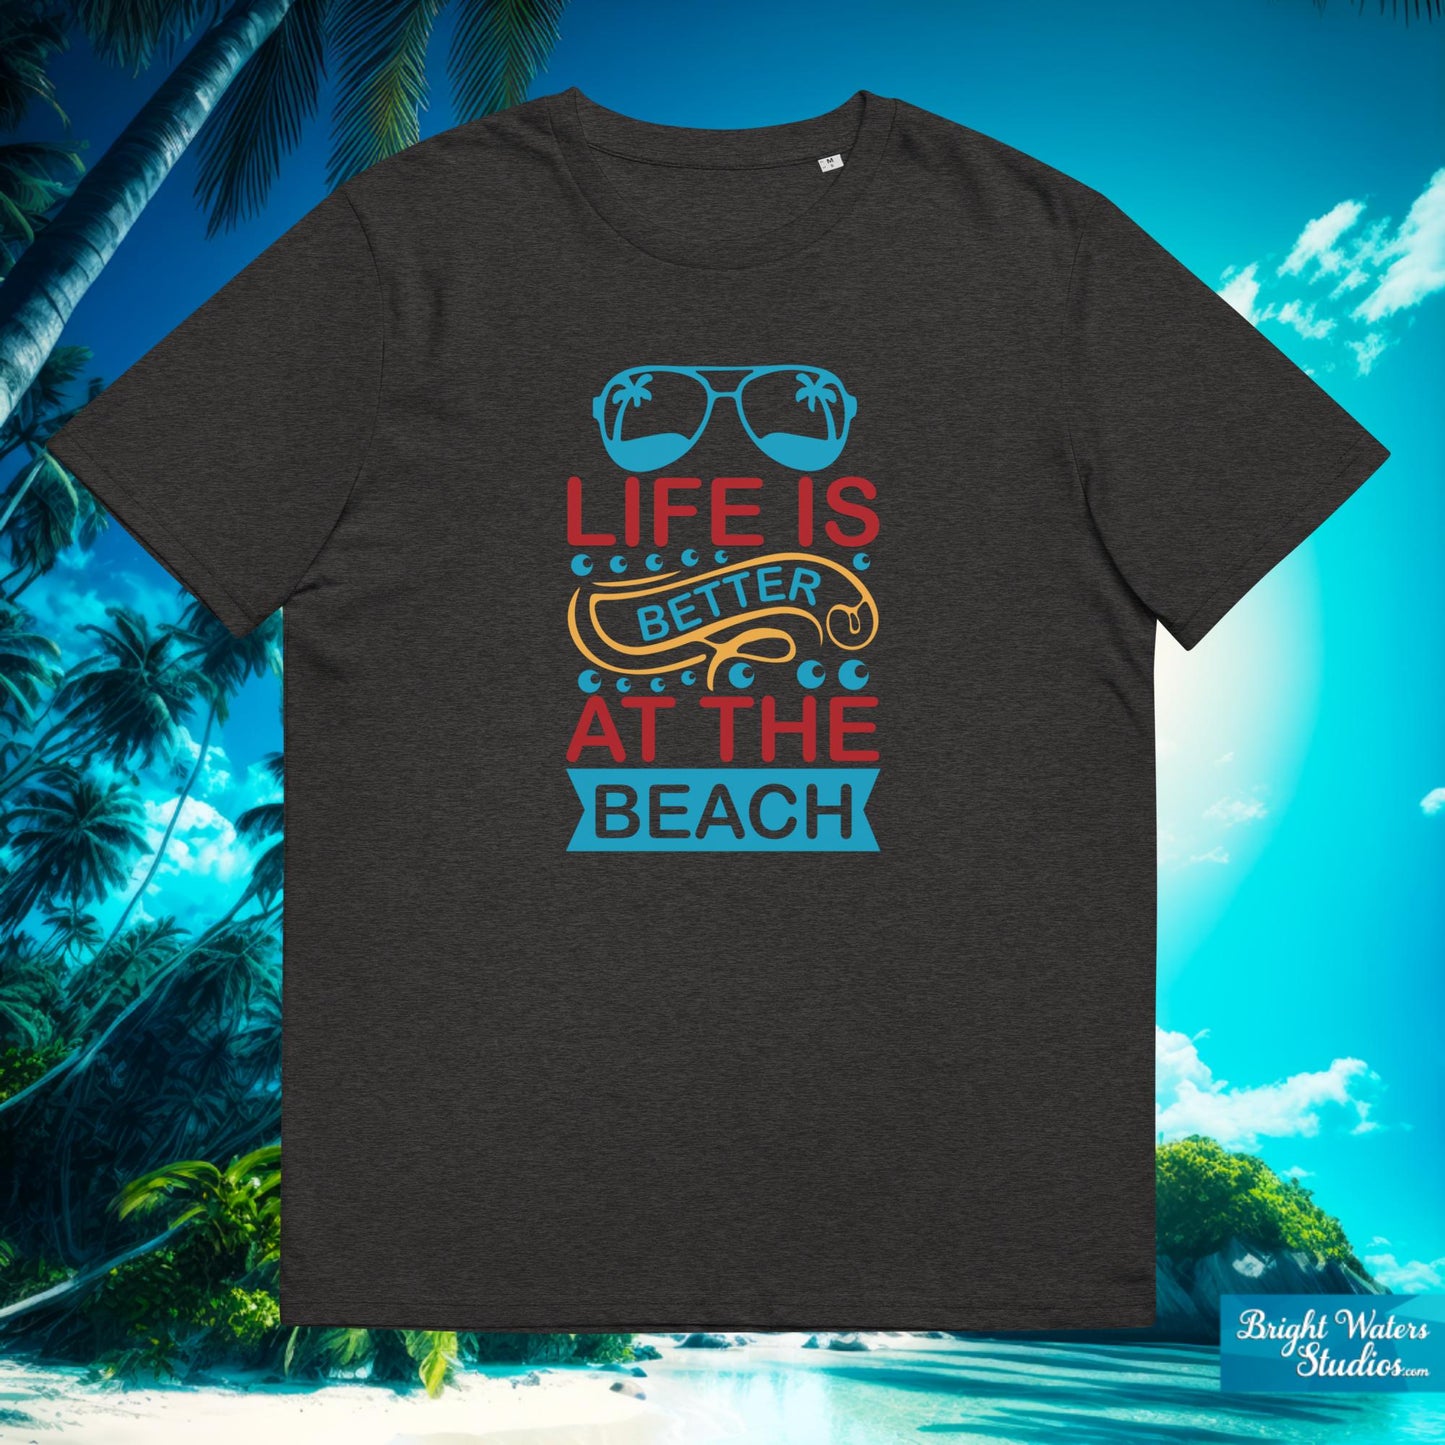 Life is Better at the Beach T-Shirt